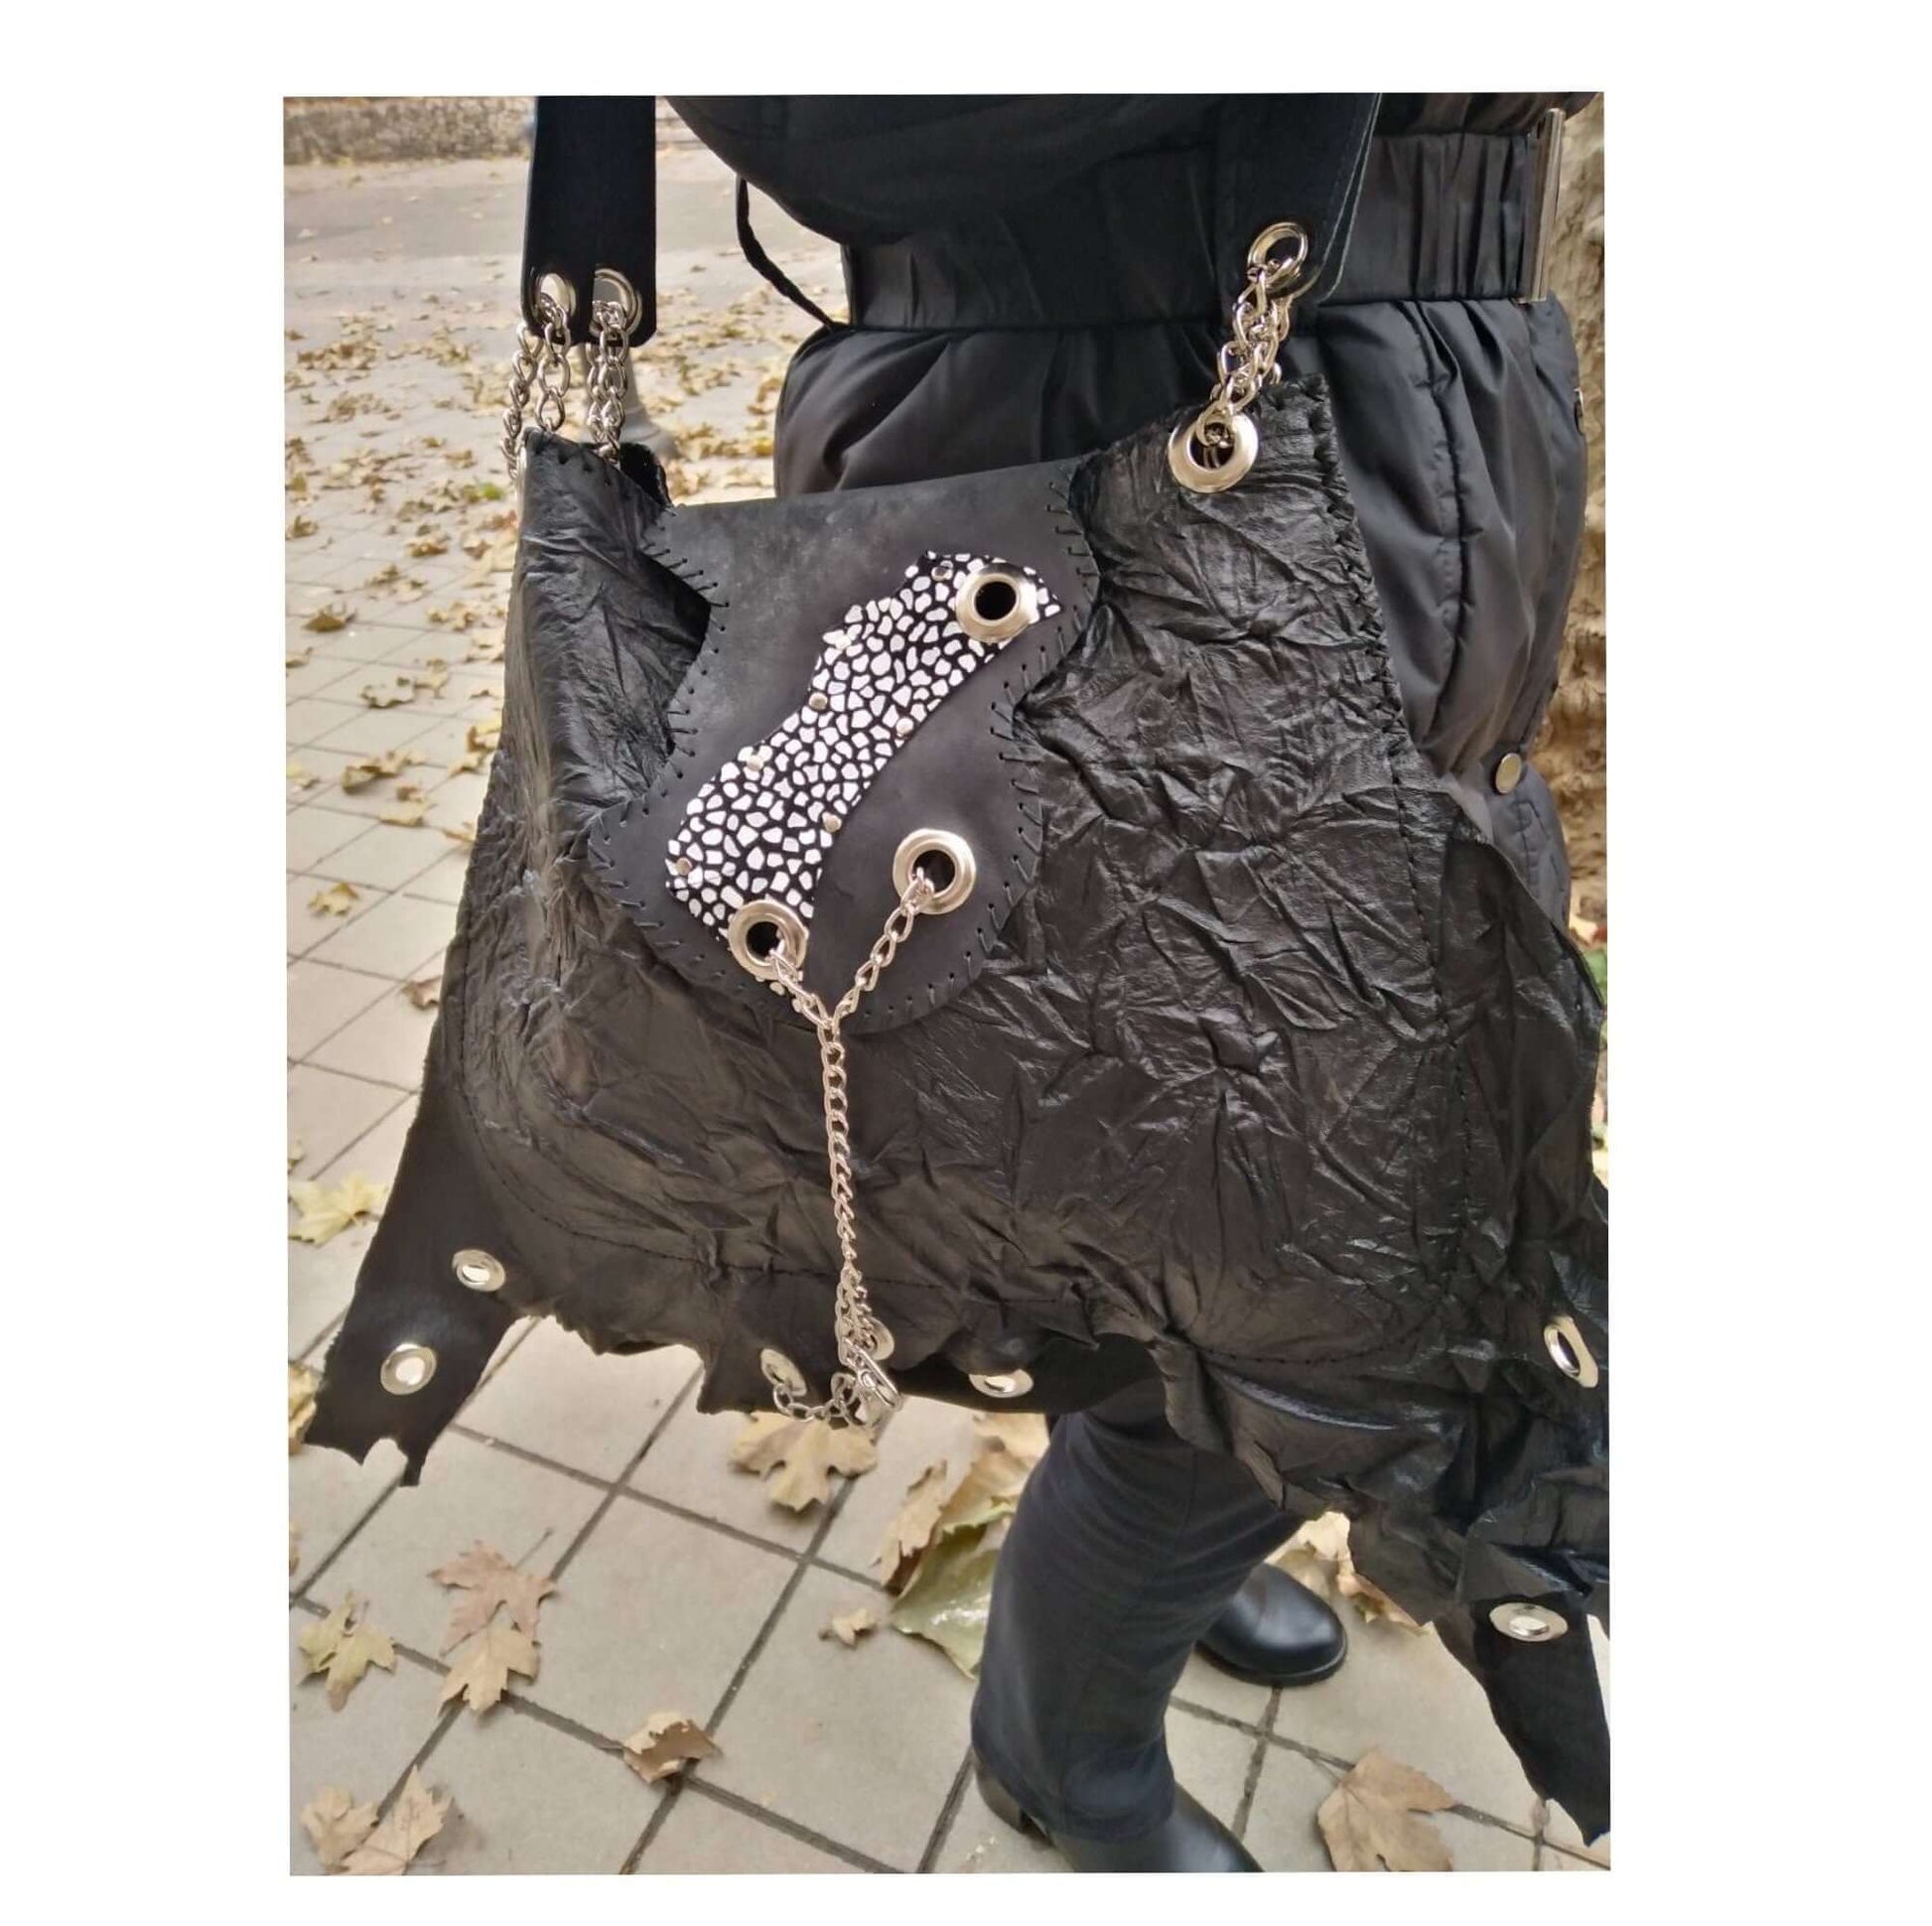 High Quality Leather Bag - Handmade clothing from AngelBySilvia - Top Designer Brands 